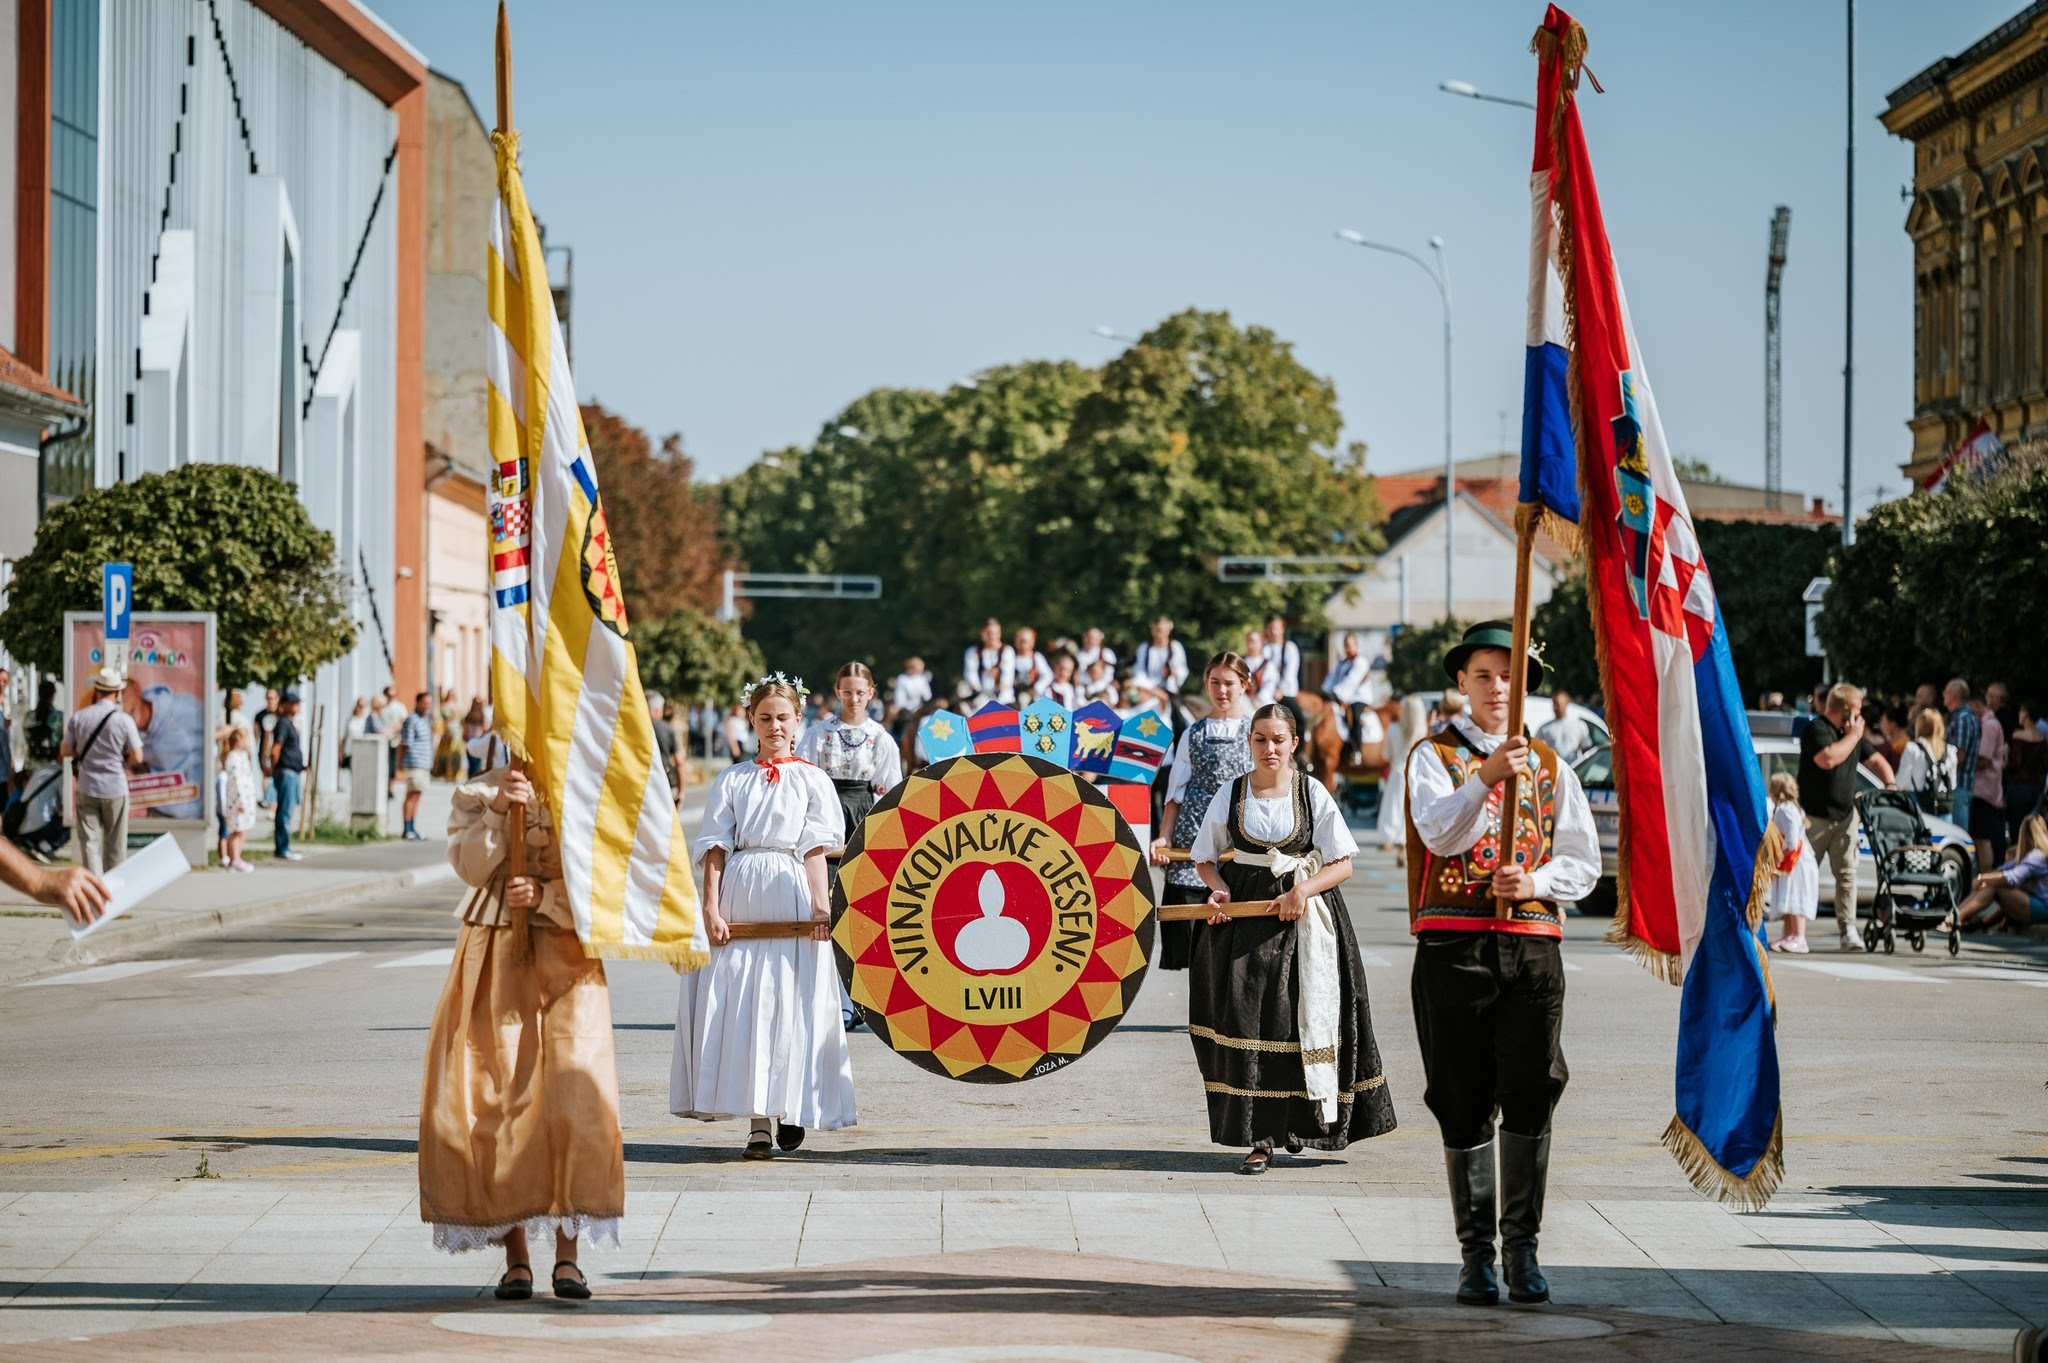 Over Croatian 2,000 kids show how tradition is loved and respected with folk costume parade  